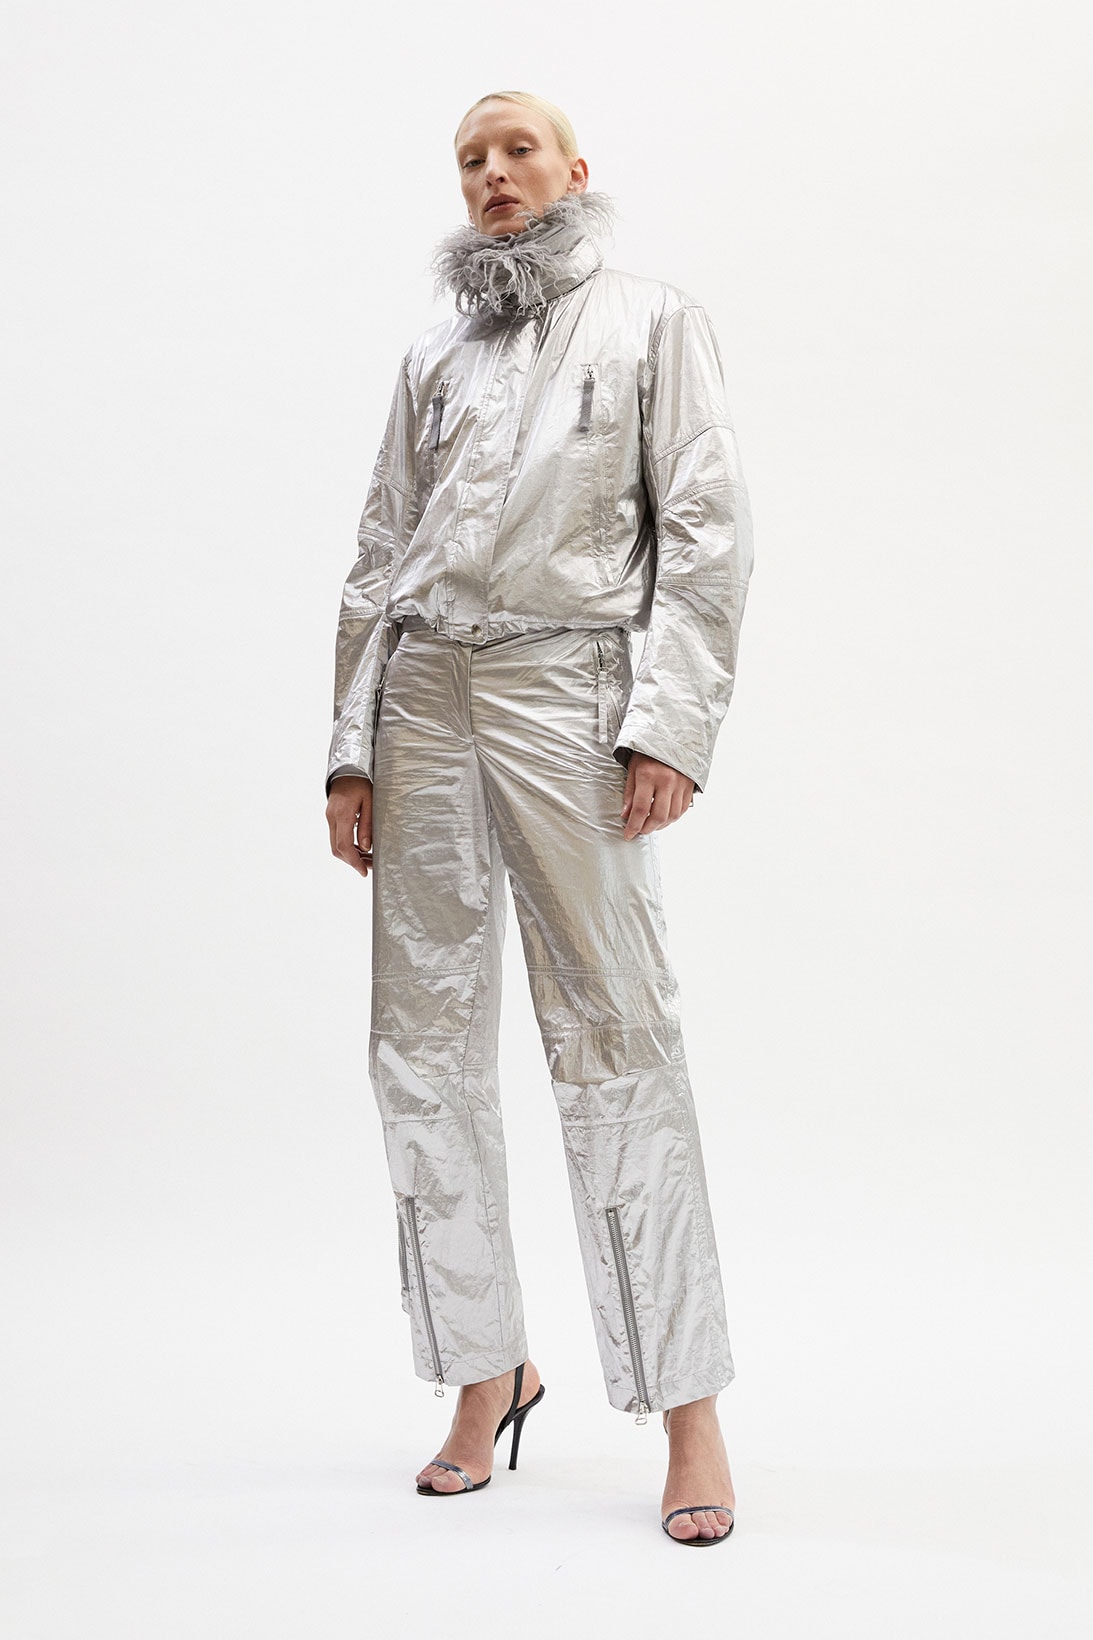 helmut lang fall winter 2021 fw21 collection lookbook silver metallic suit jacket